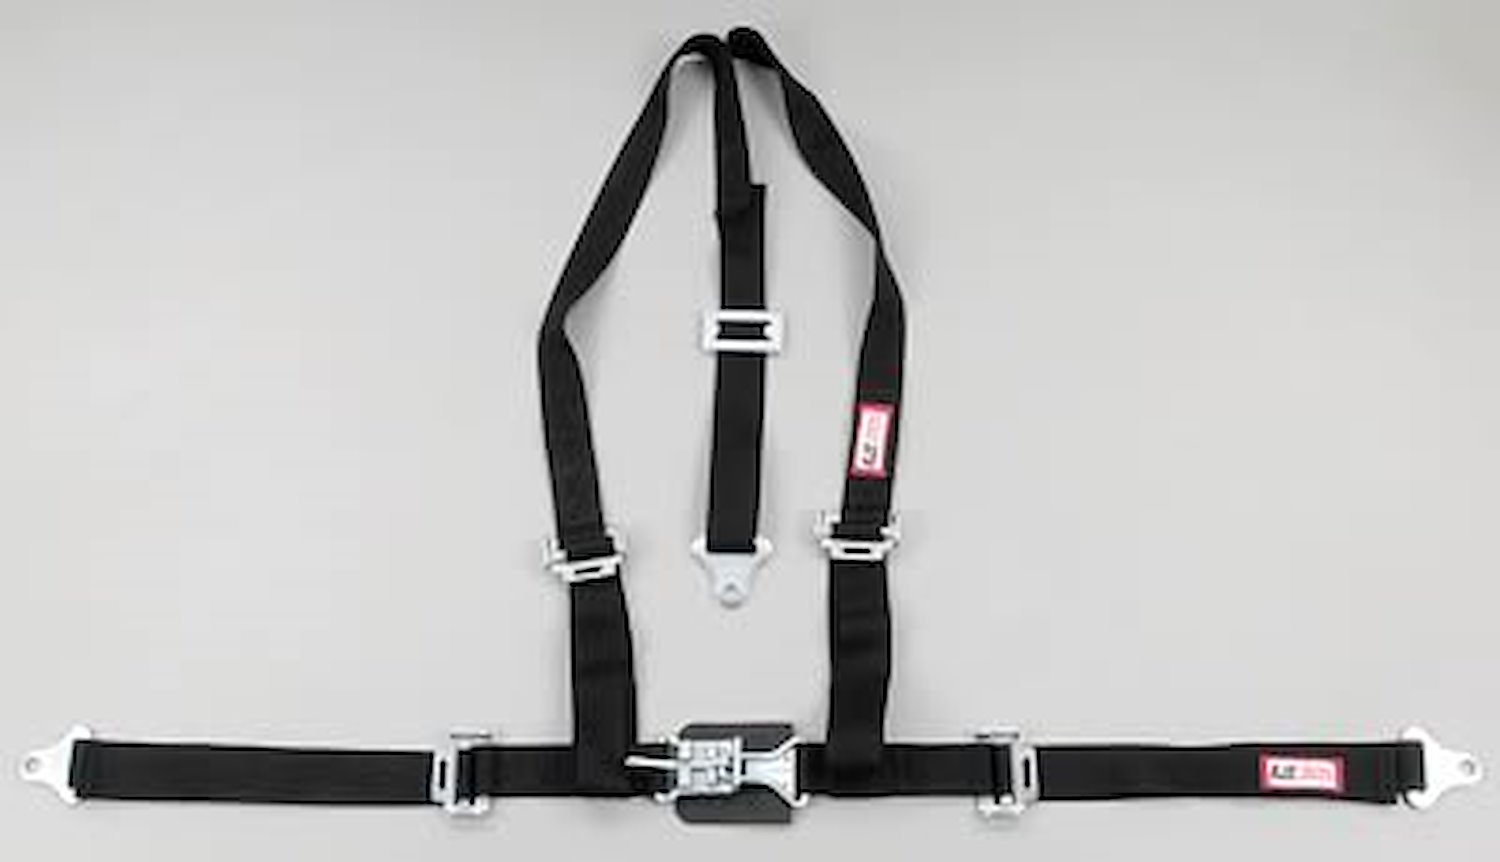 NON-SFI L&L HARNESS 2 PULL DOWN Lap Belt BOLT SEWN IN 2 S.H. Y FLOOR Mount w/STERNUM STRAP WRAP/BOLT HOT PINK